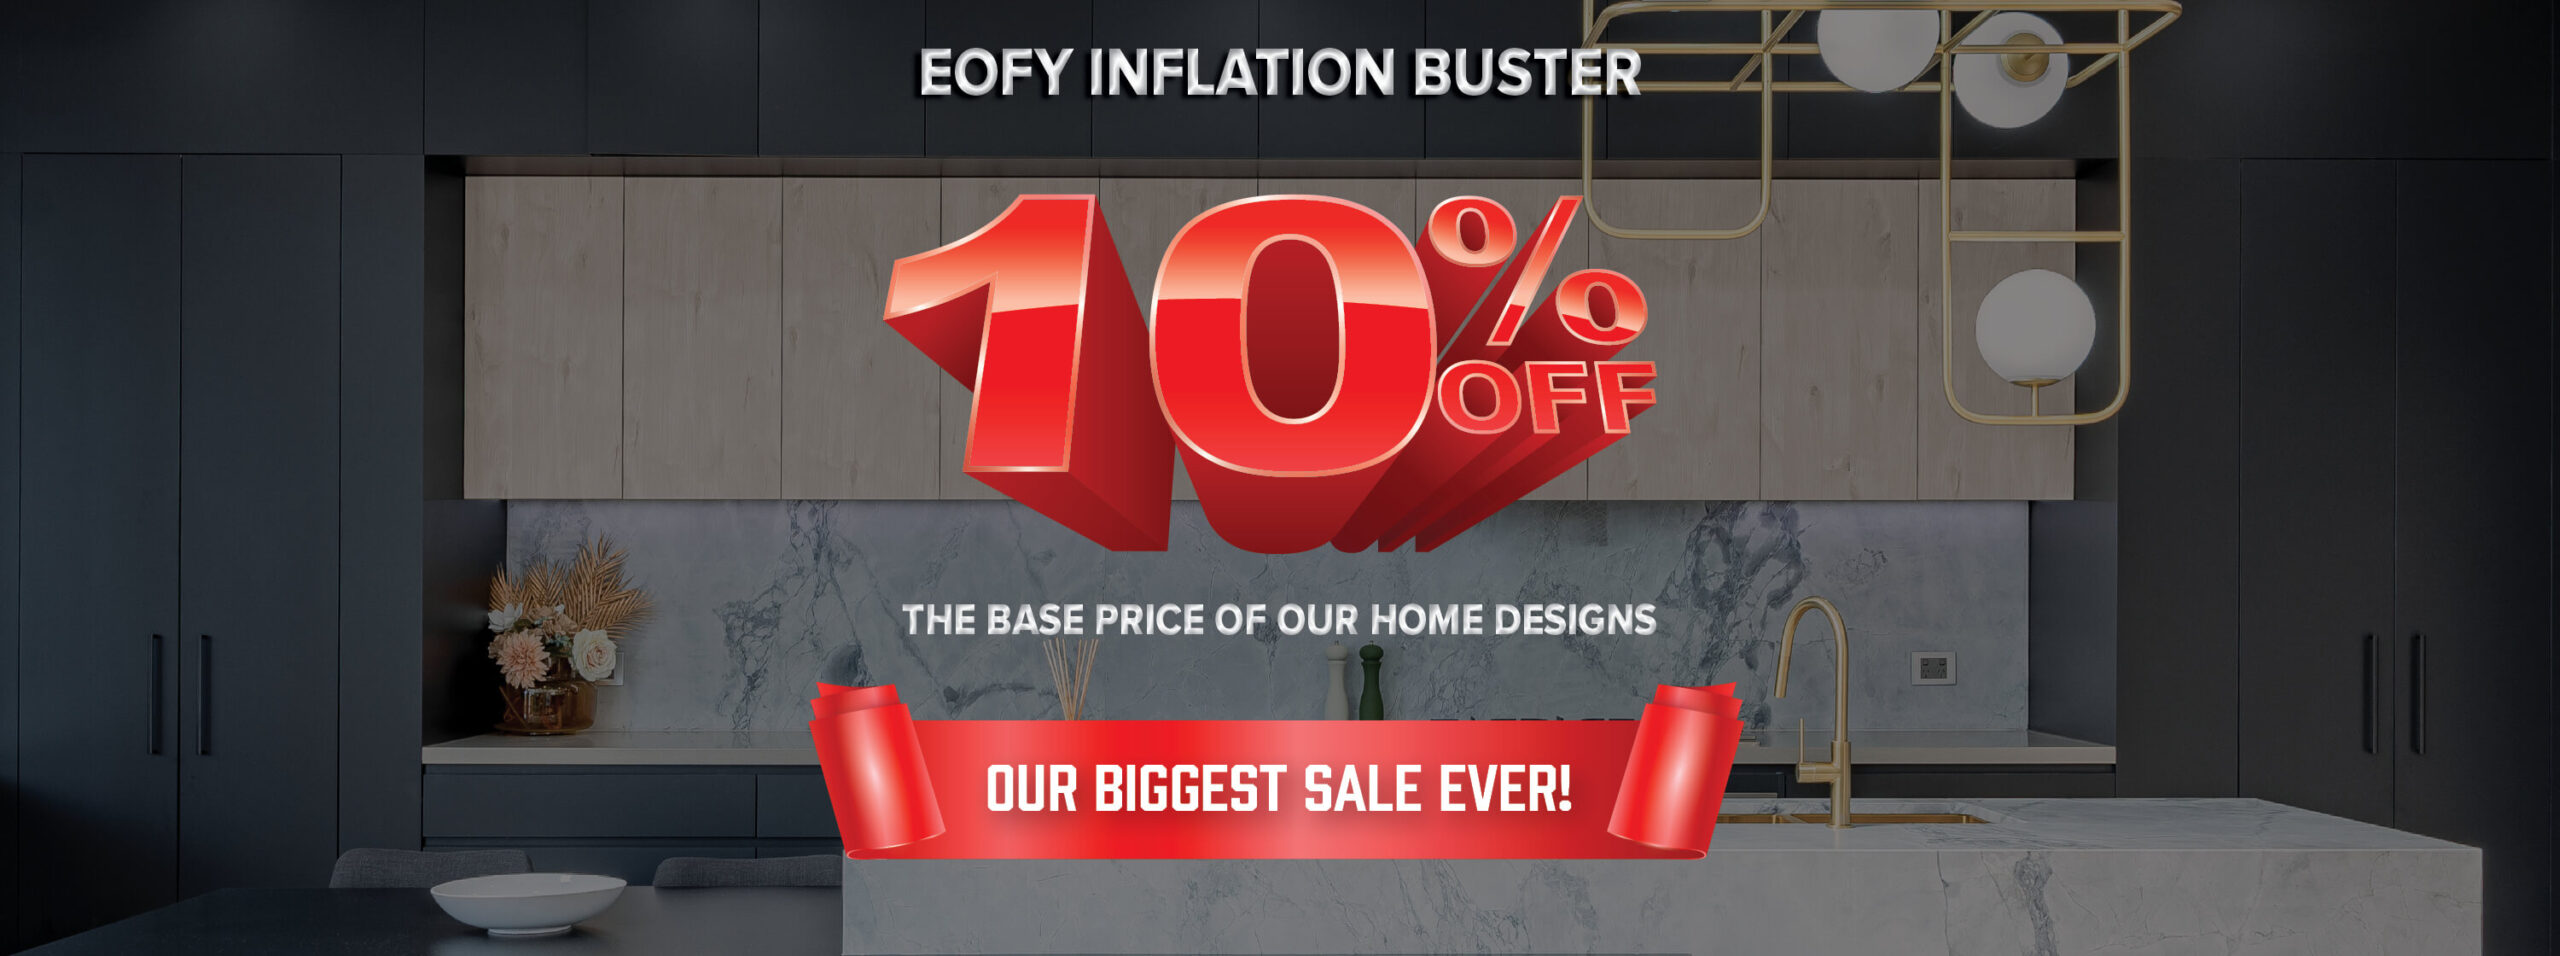 EOFY Inflation Buster - Our biggest sale